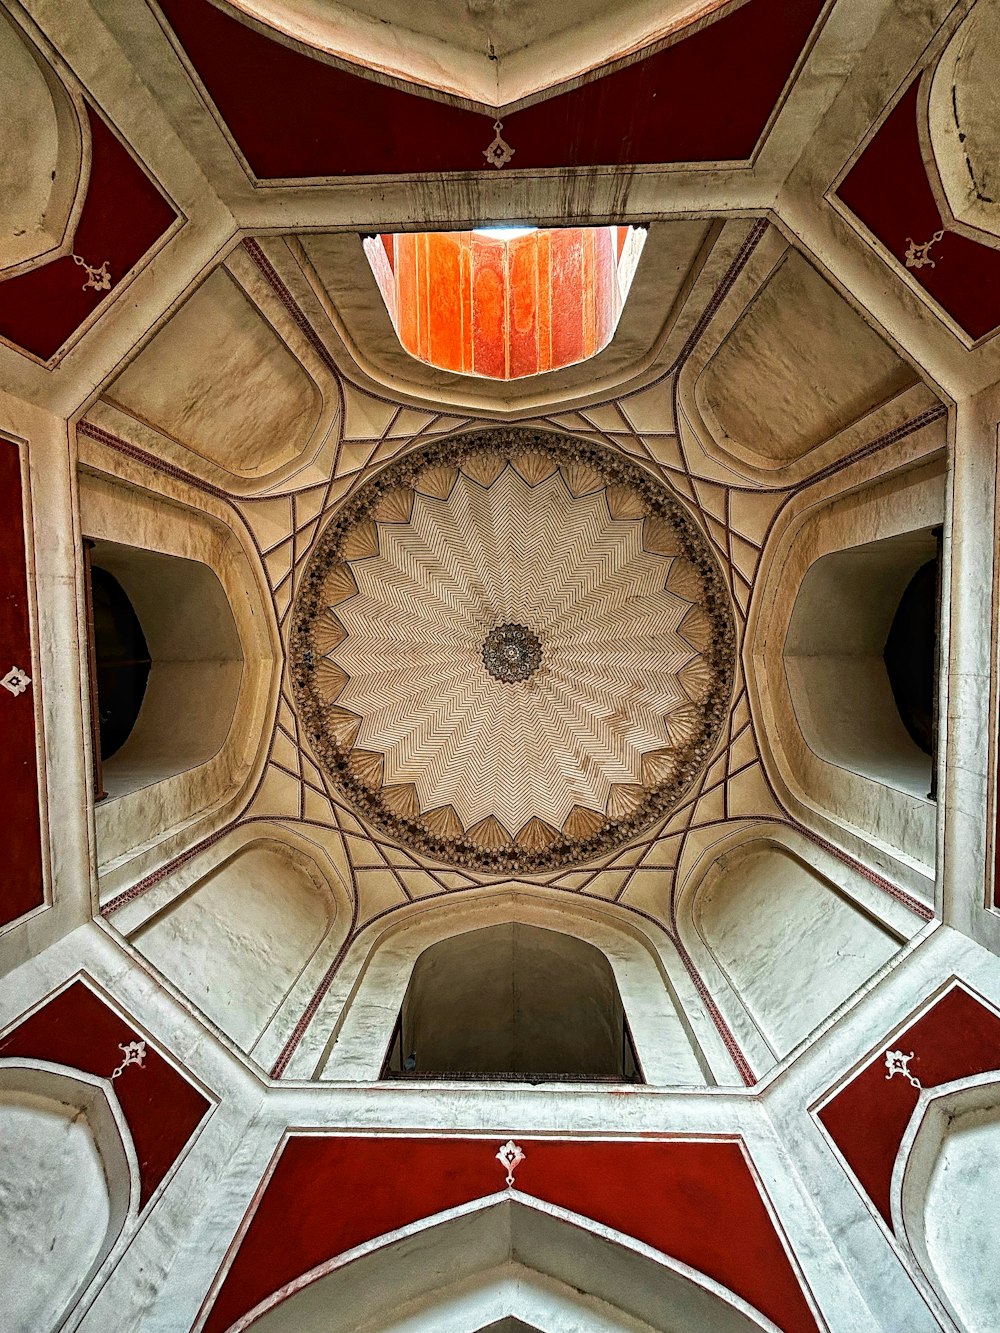 the ceiling of a building with red and white walls